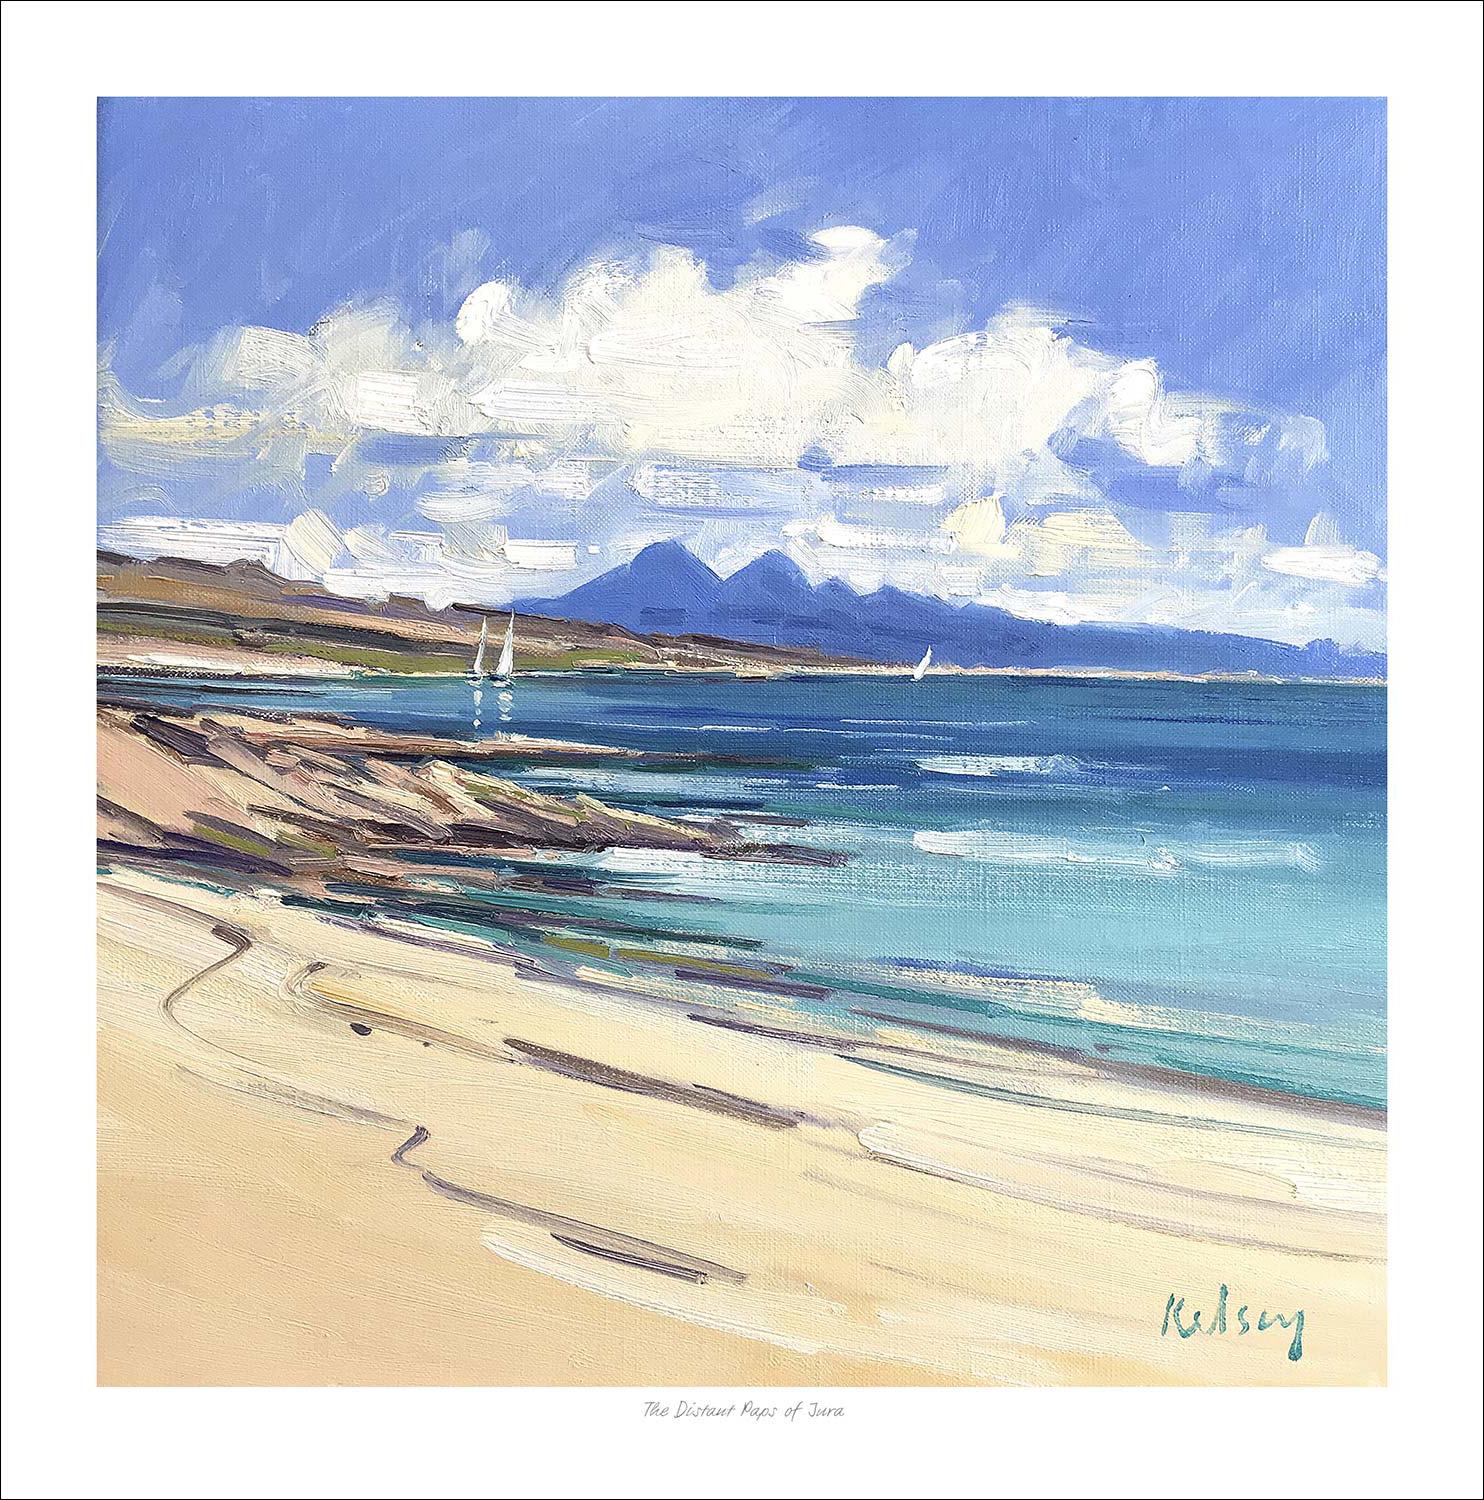 The Distant Paps of Jura Art Print from an original painting by artist Robert Kelsey